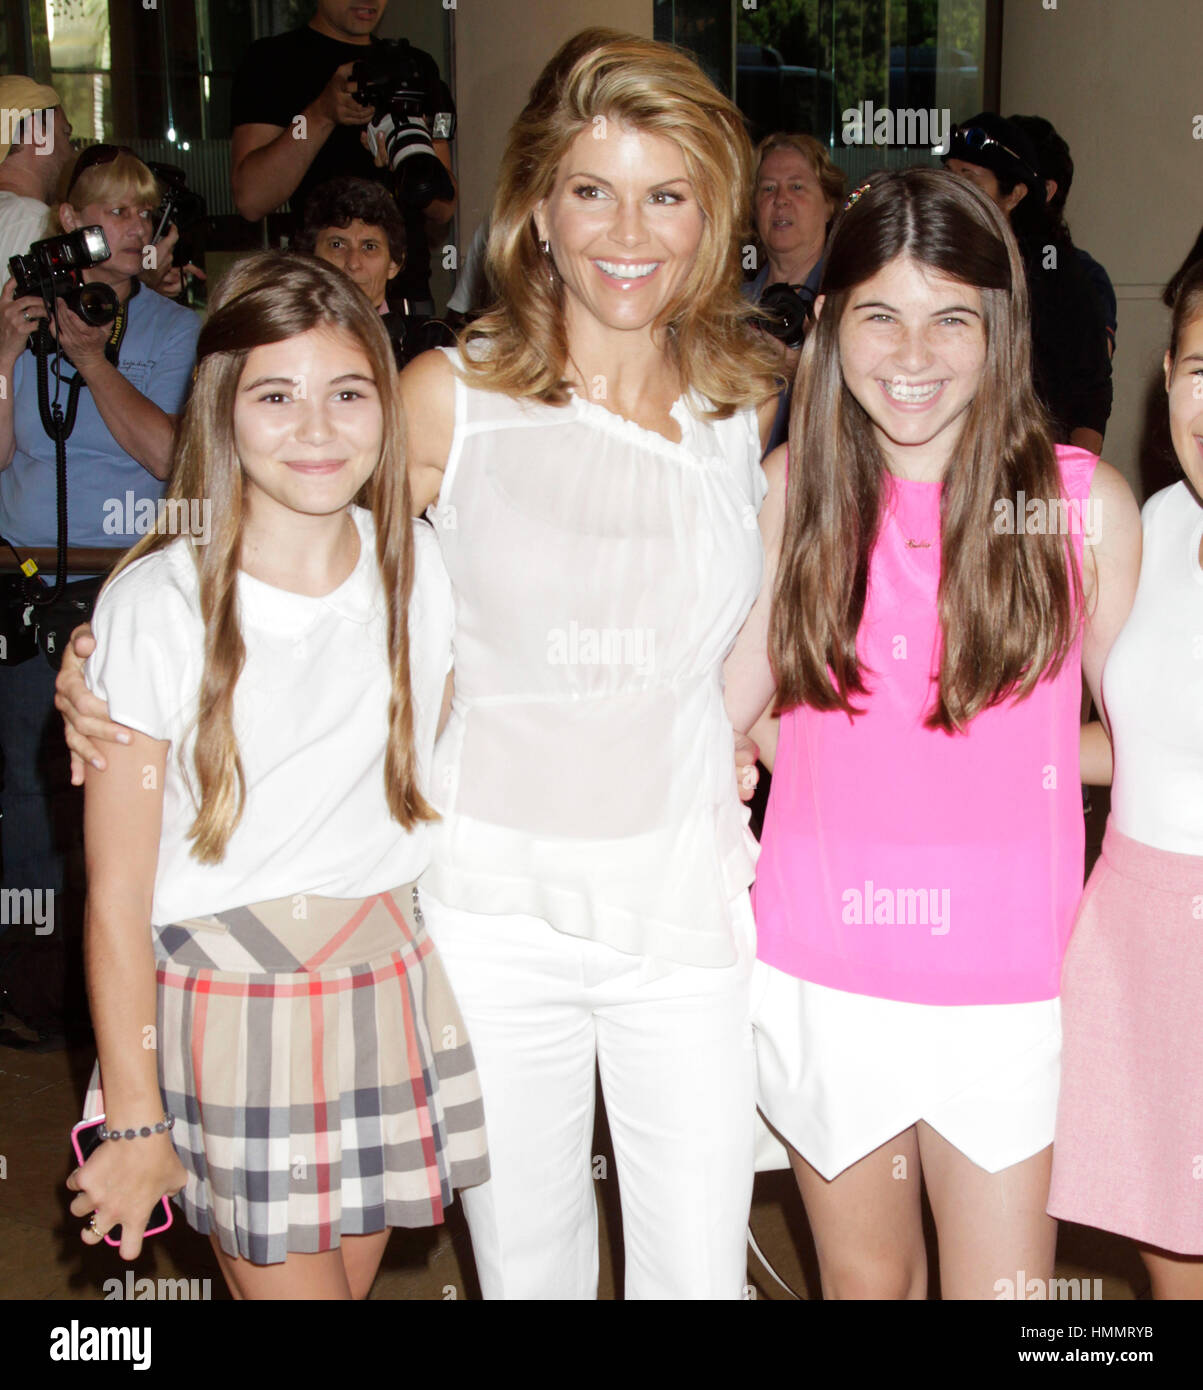 Lori Loughlin, center, with her daughters, Olivia Jade Giannulli, left, and Isabella  Rose Giannulli arrive for the Hallmark Channel and Hallmark Movie Channel  presentation at the 2013 Summer TV Critics Press Tour